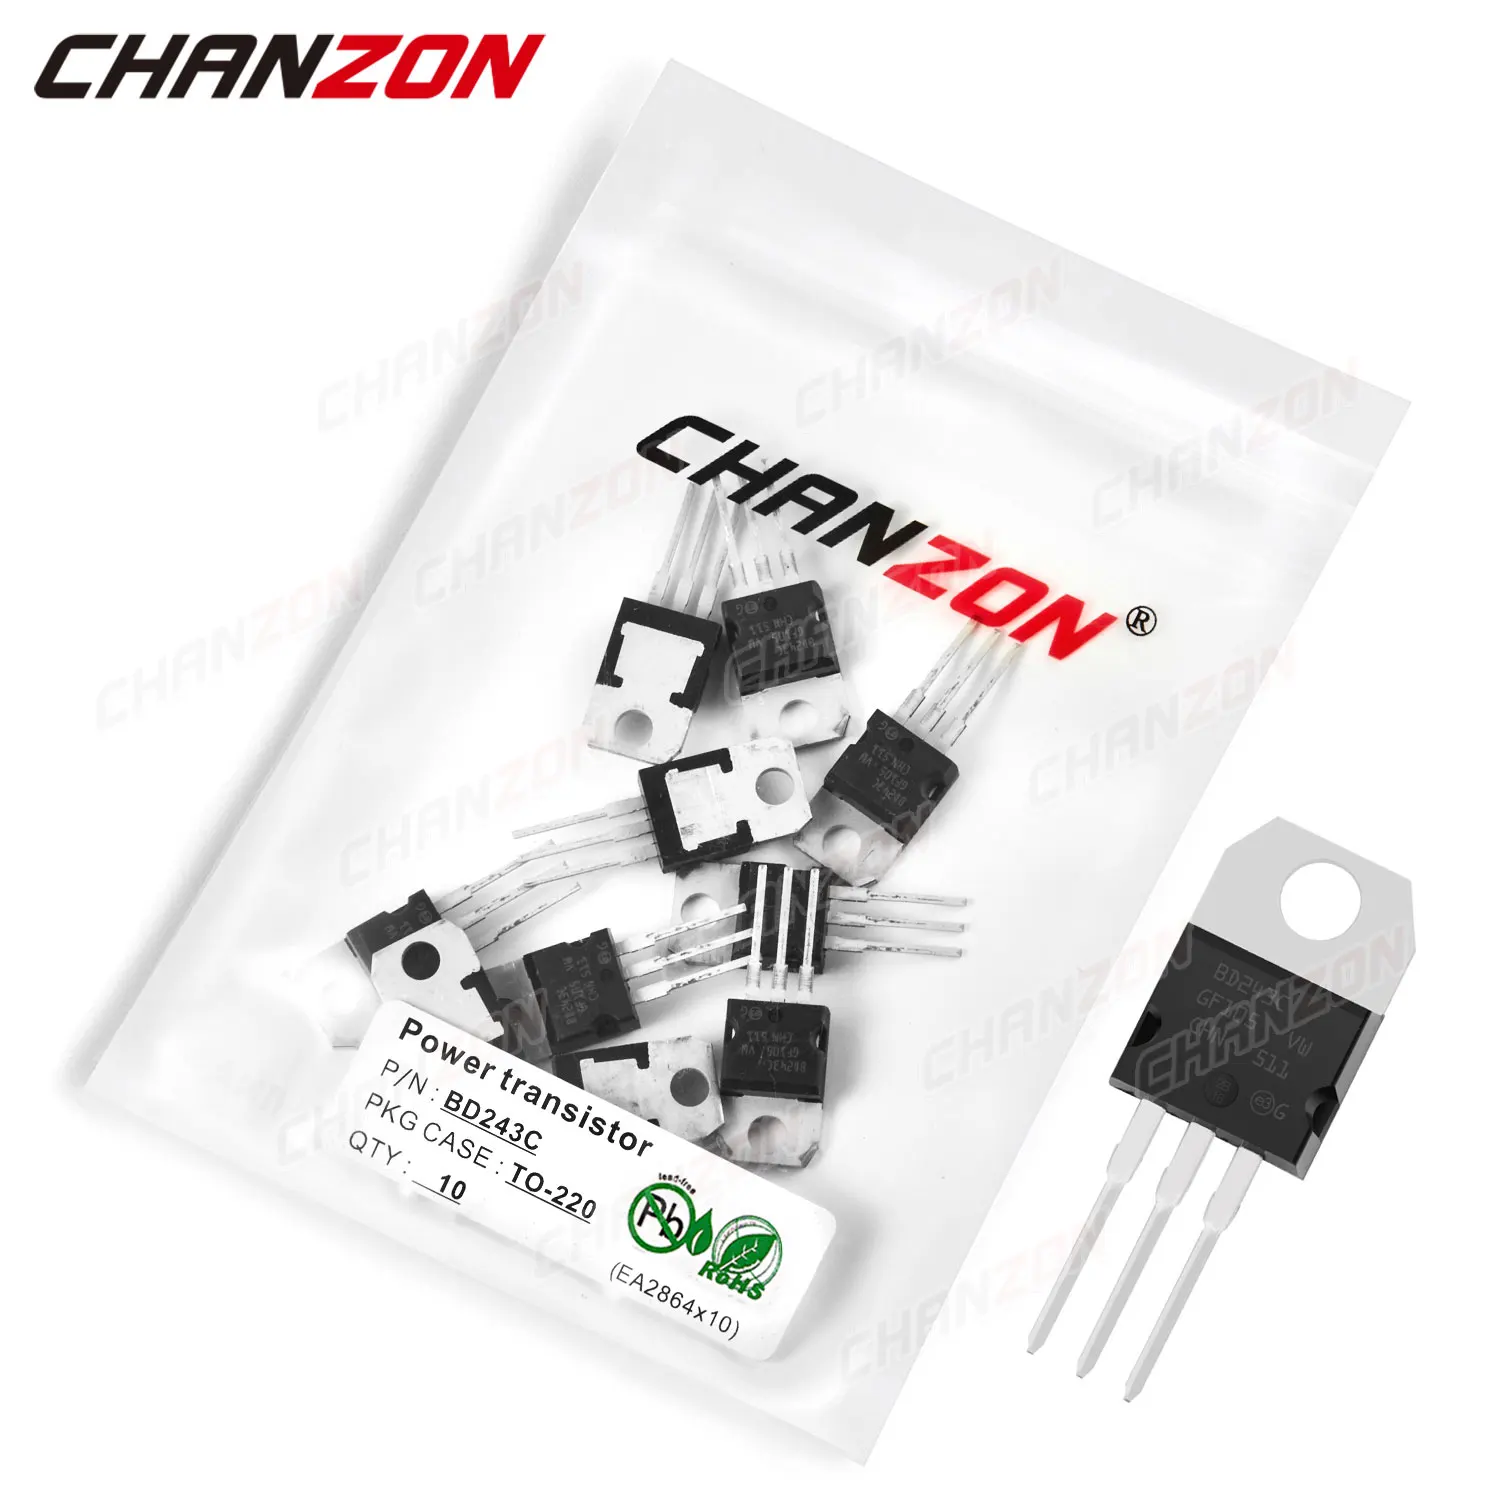 

10Pcs BD243C TO-220 BD243 Power Transistor Bipolar Junction BJT Powerful Triode Tube Fets DIP 6A 100V Integrated Circuits